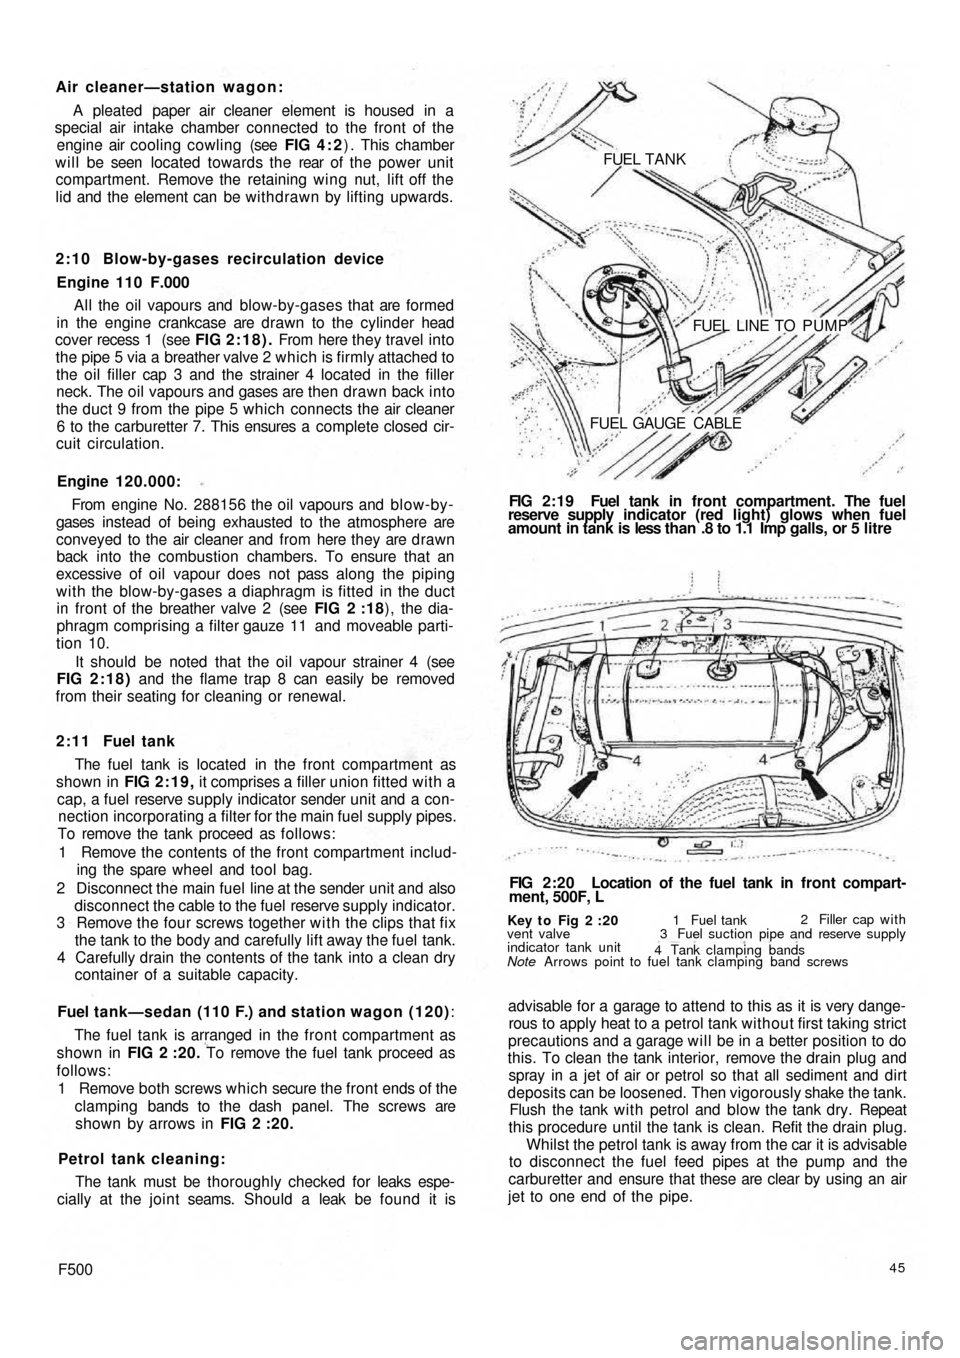 FIAT 500 1959 1.G Workshop Manual Air cleaner—station wagon:
A pleated paper air cleaner element is housed  in a
special air intake chamber connected to the front of the
engine air cooling cowling (see FIG 4 : 2) . This chamber
will